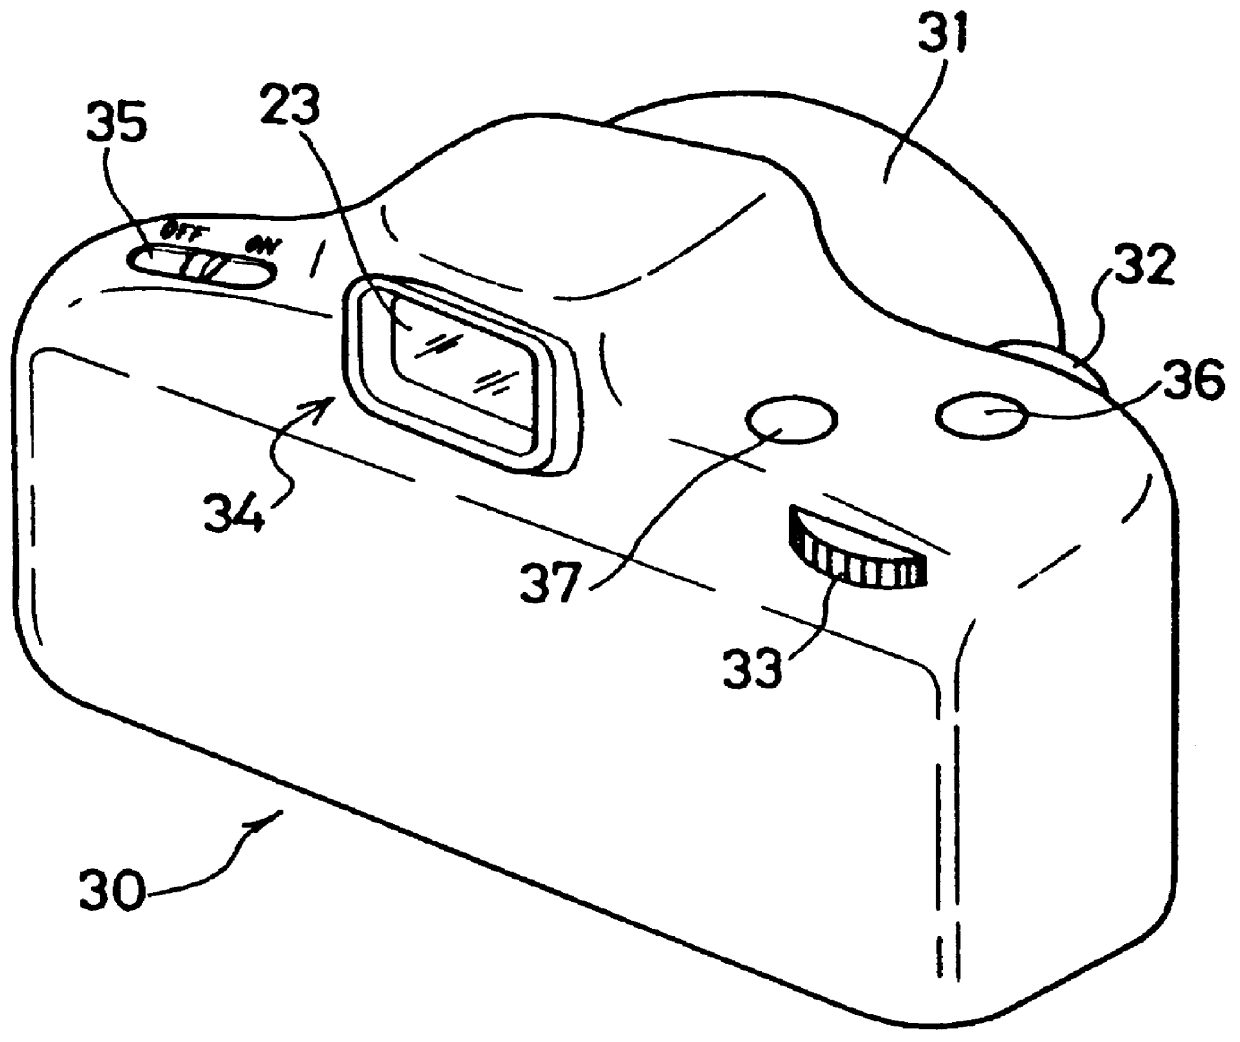 Camera capable of displaying the level of visual effect